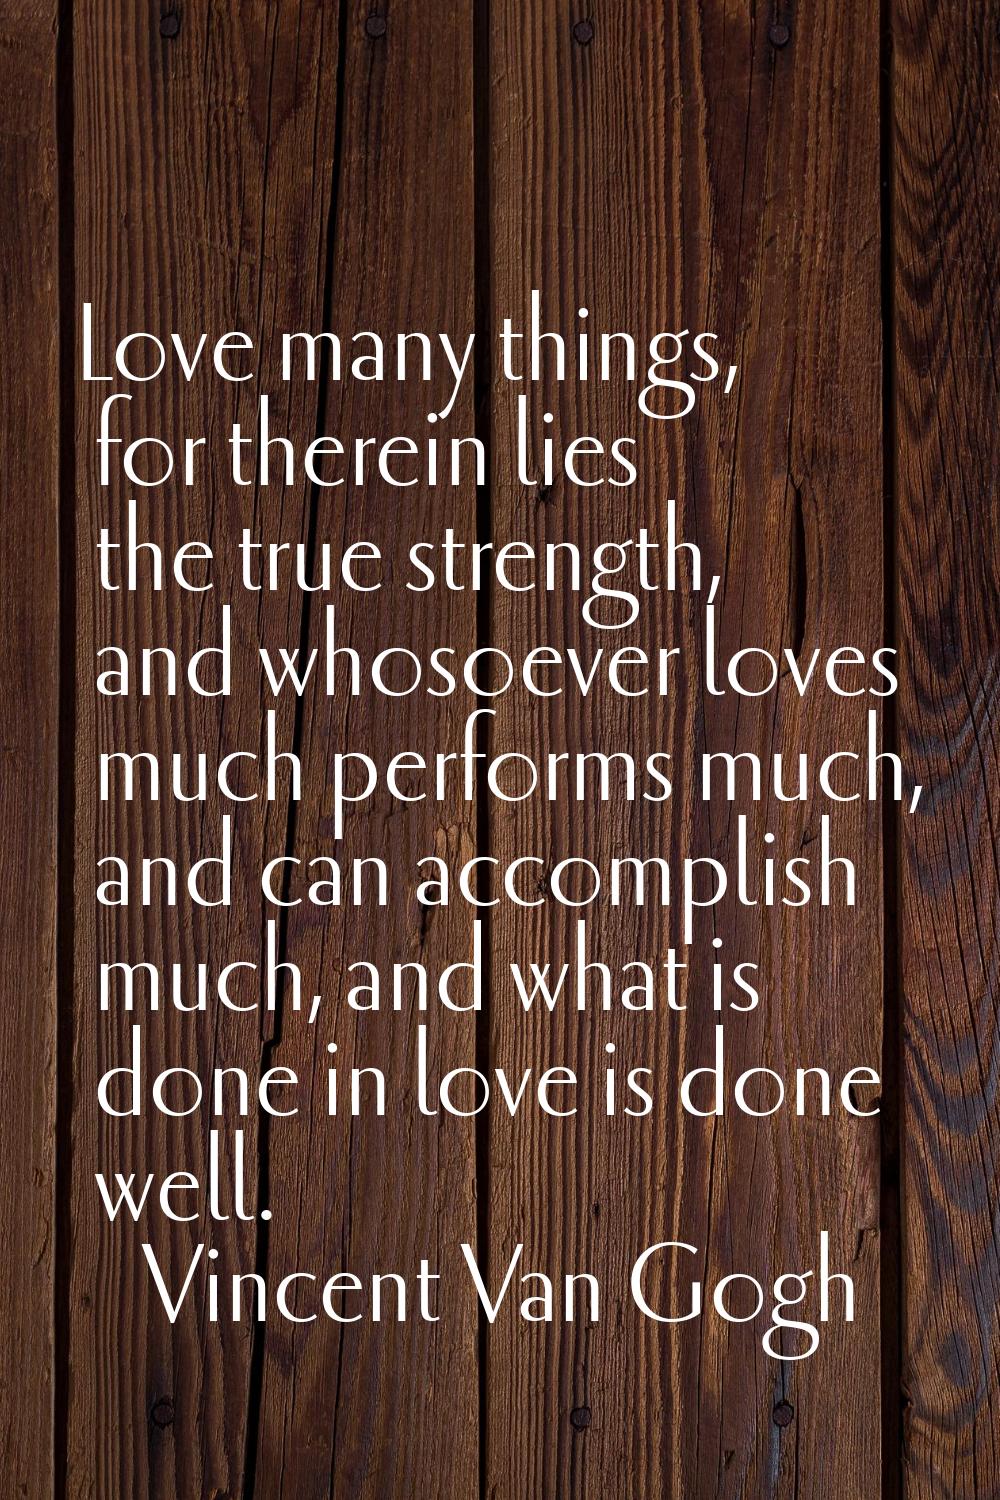 Love many things, for therein lies the true strength, and whosoever loves much performs much, and c